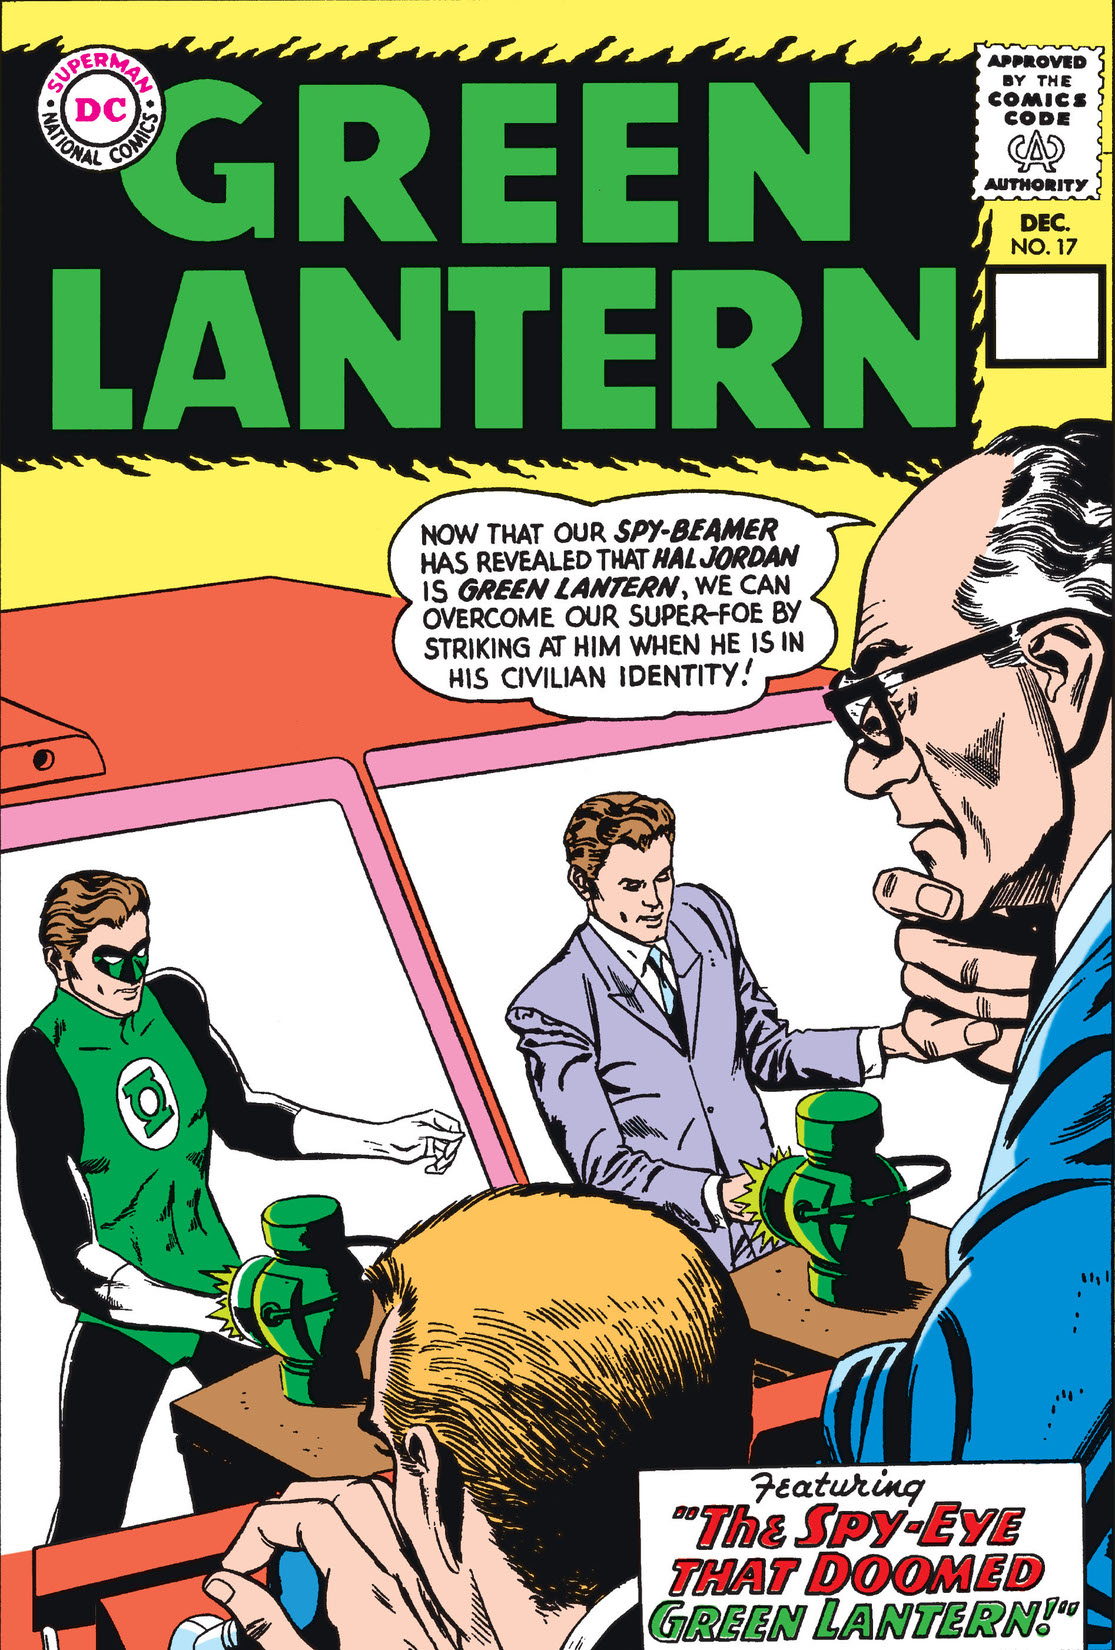 Green Lantern (1960-) #17 preview images